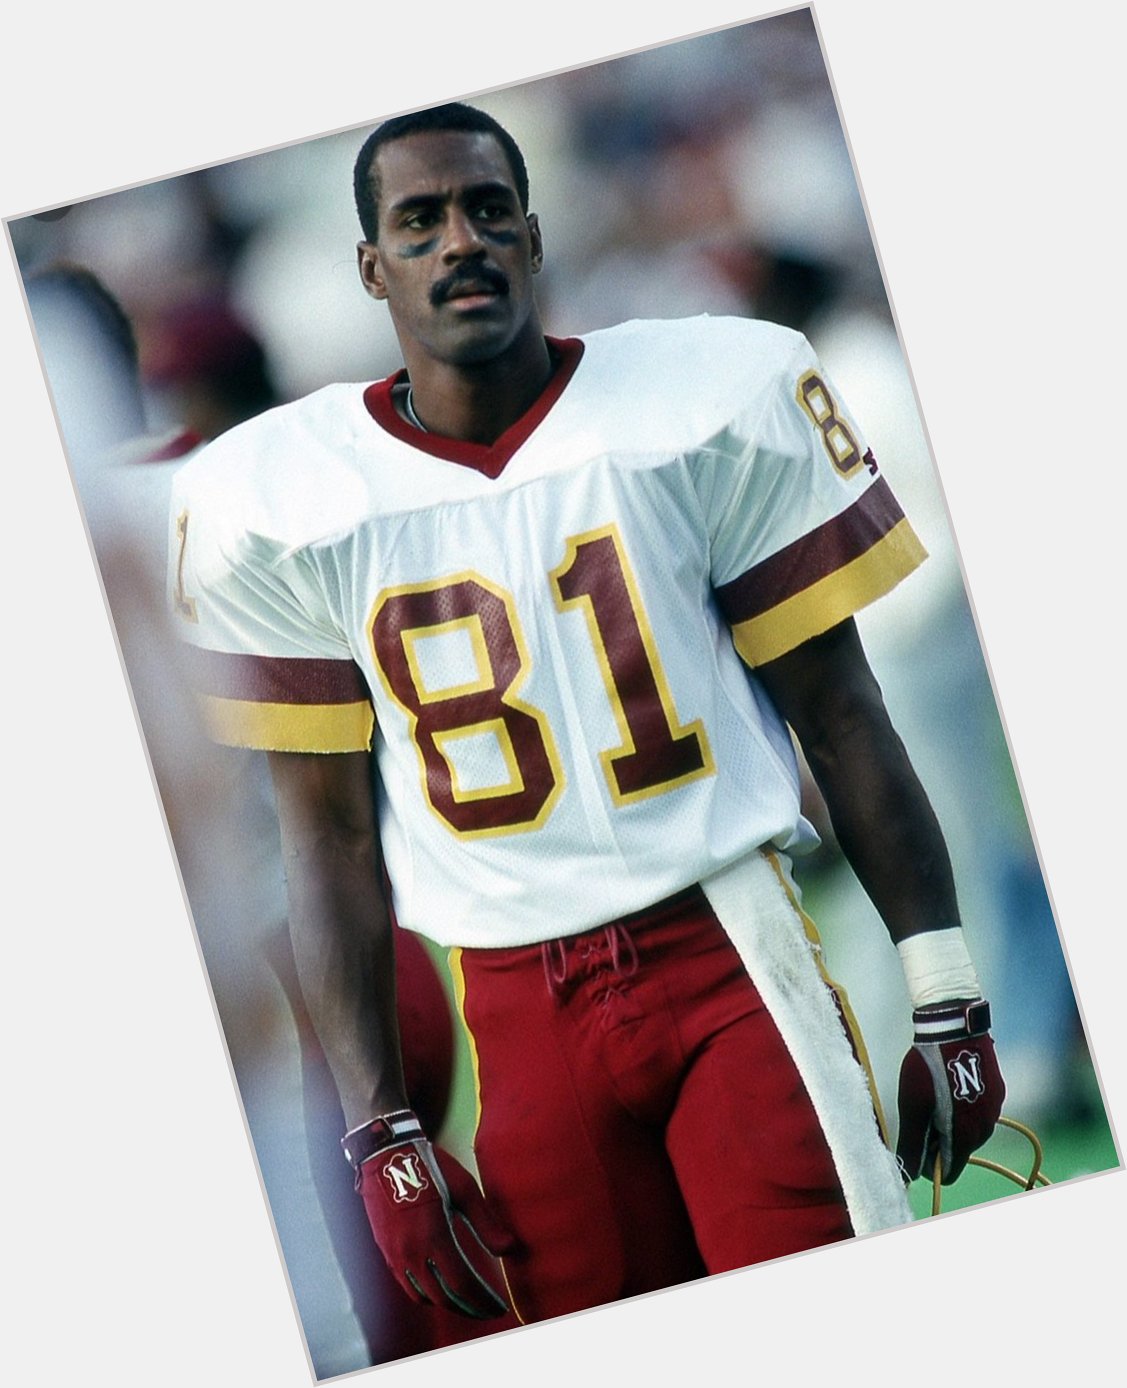 Can I get a HTTR happy birthday to the man I share a birthday with? Happy 64th birthday to the great Art Monk! 